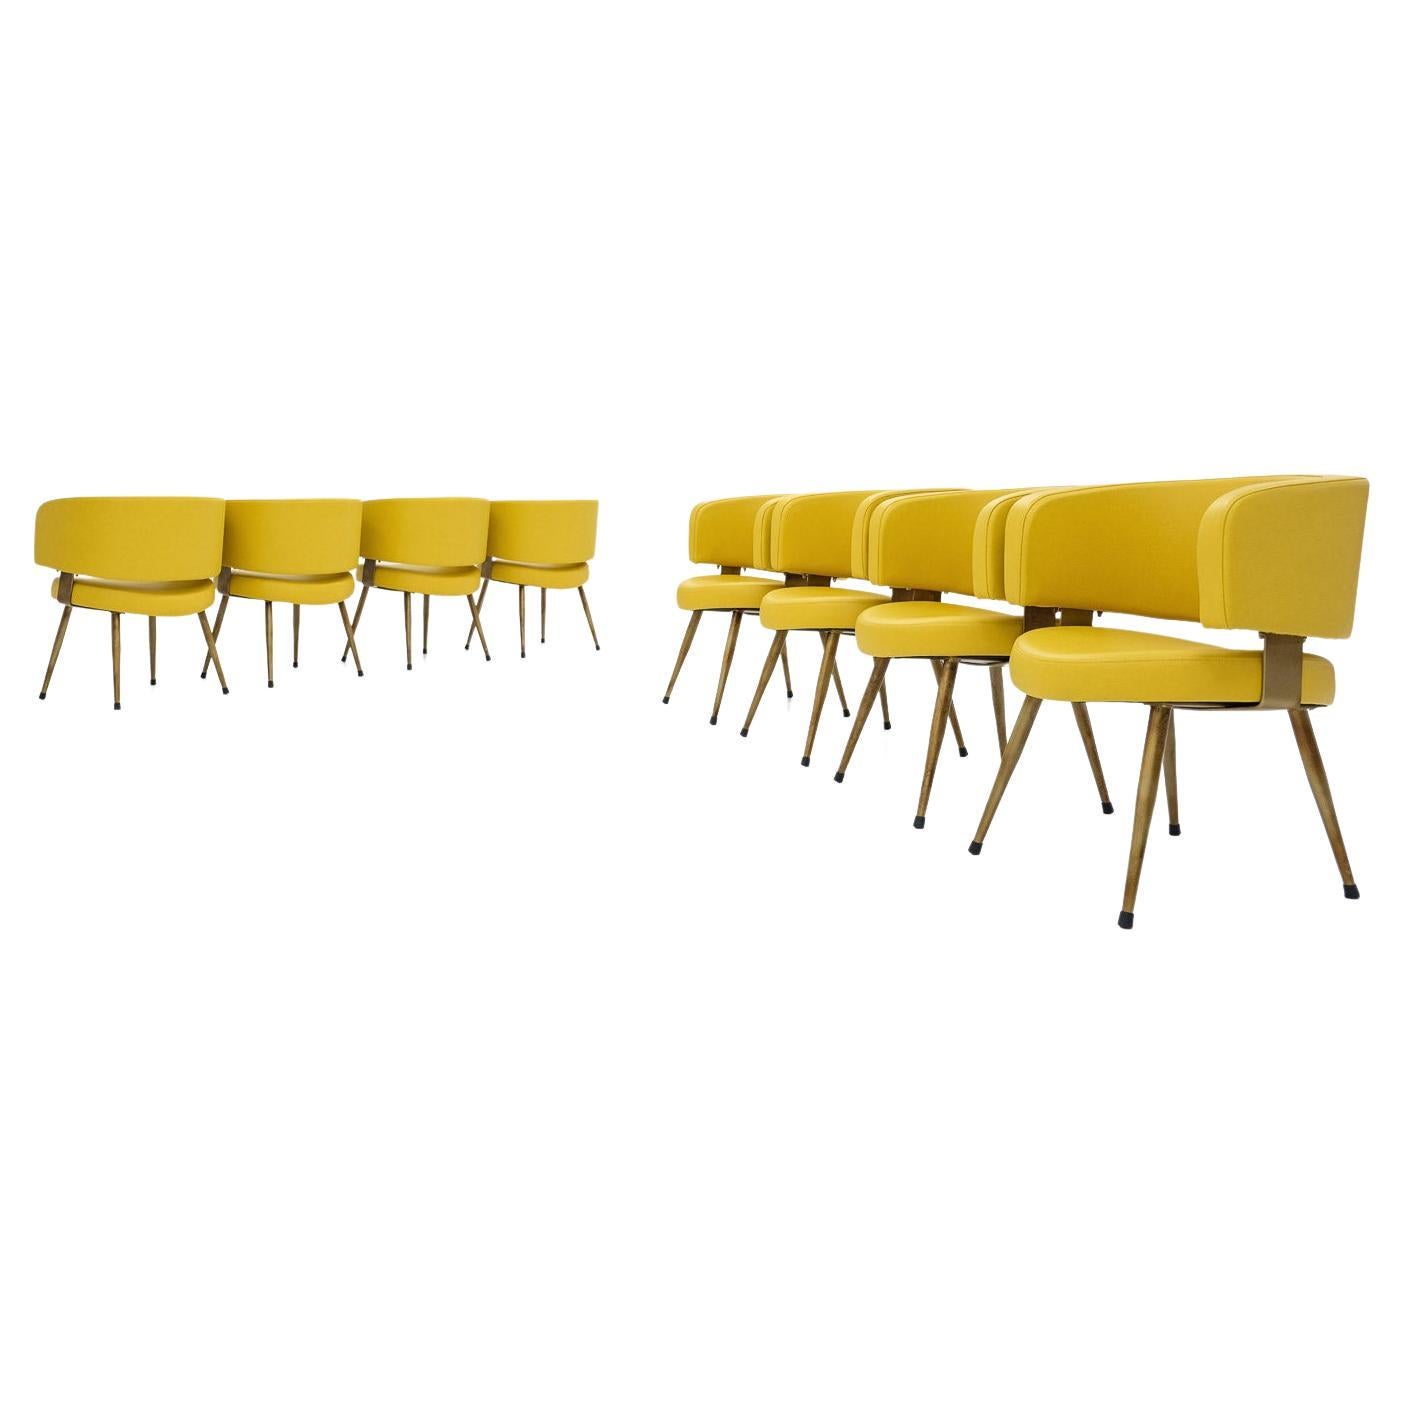 Set of 8 Italian armchairs, newly upholstered in yellow leatherette & metal base